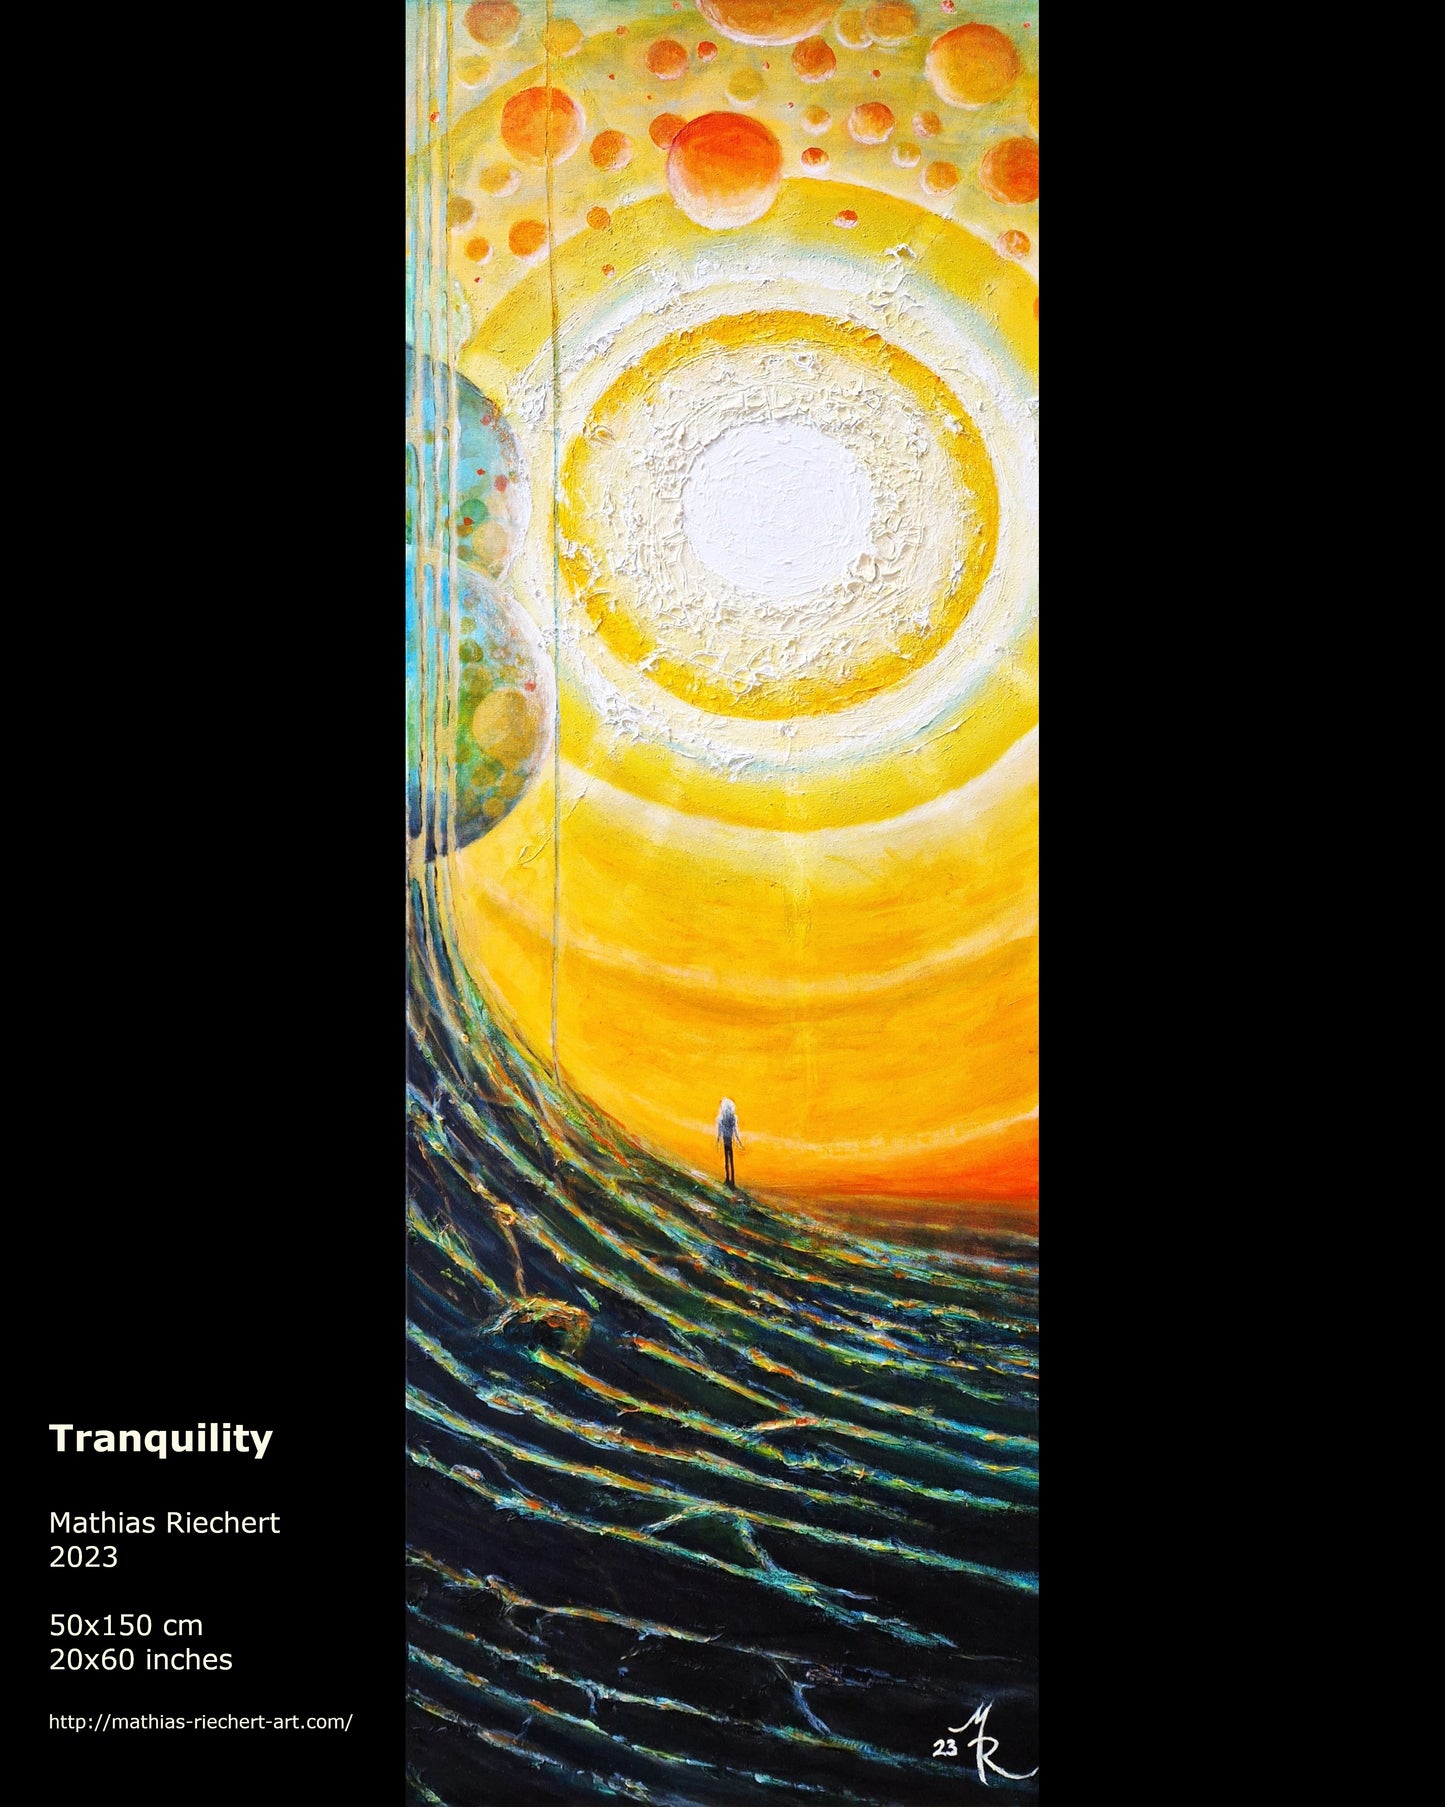 Original acrylic painting "Tranquility", 50x150 cm, 20x60 inches